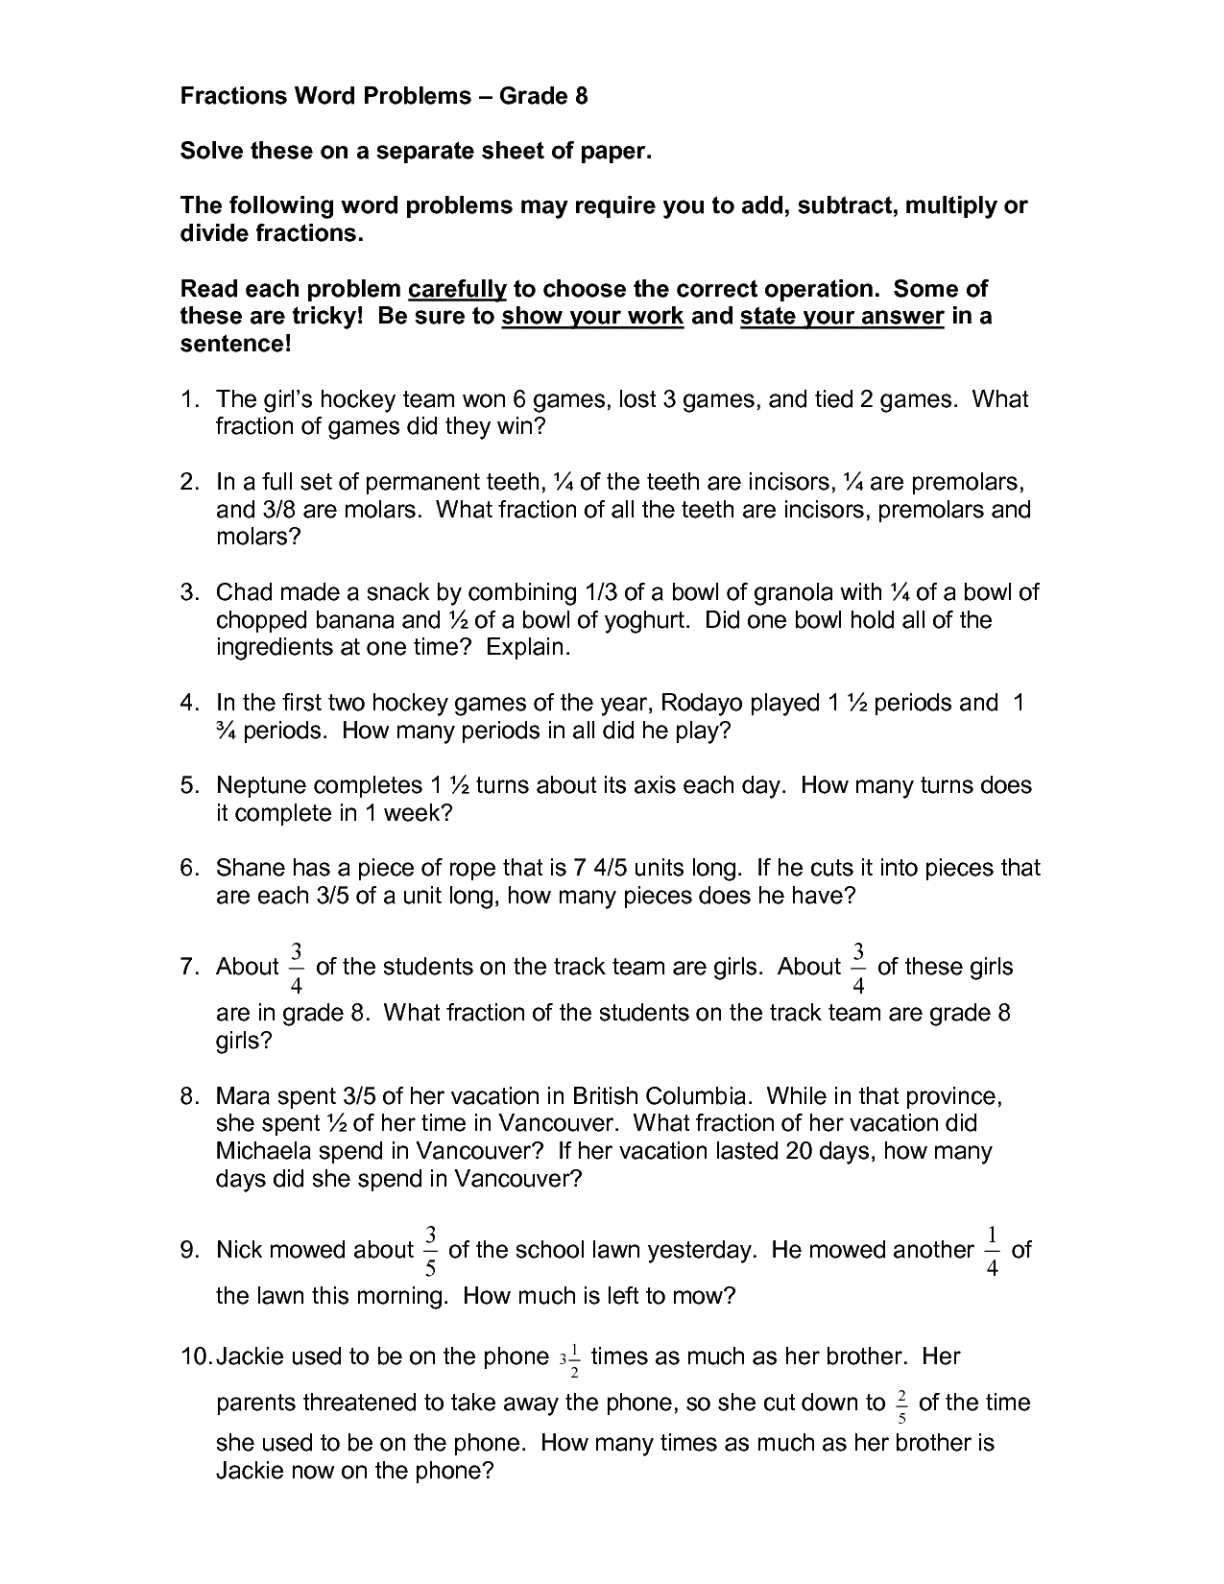 Proportion Word Problems Worksheet 7th Grade together with Fraction Word Problemsrd Grade Mon Core Math Worksheets